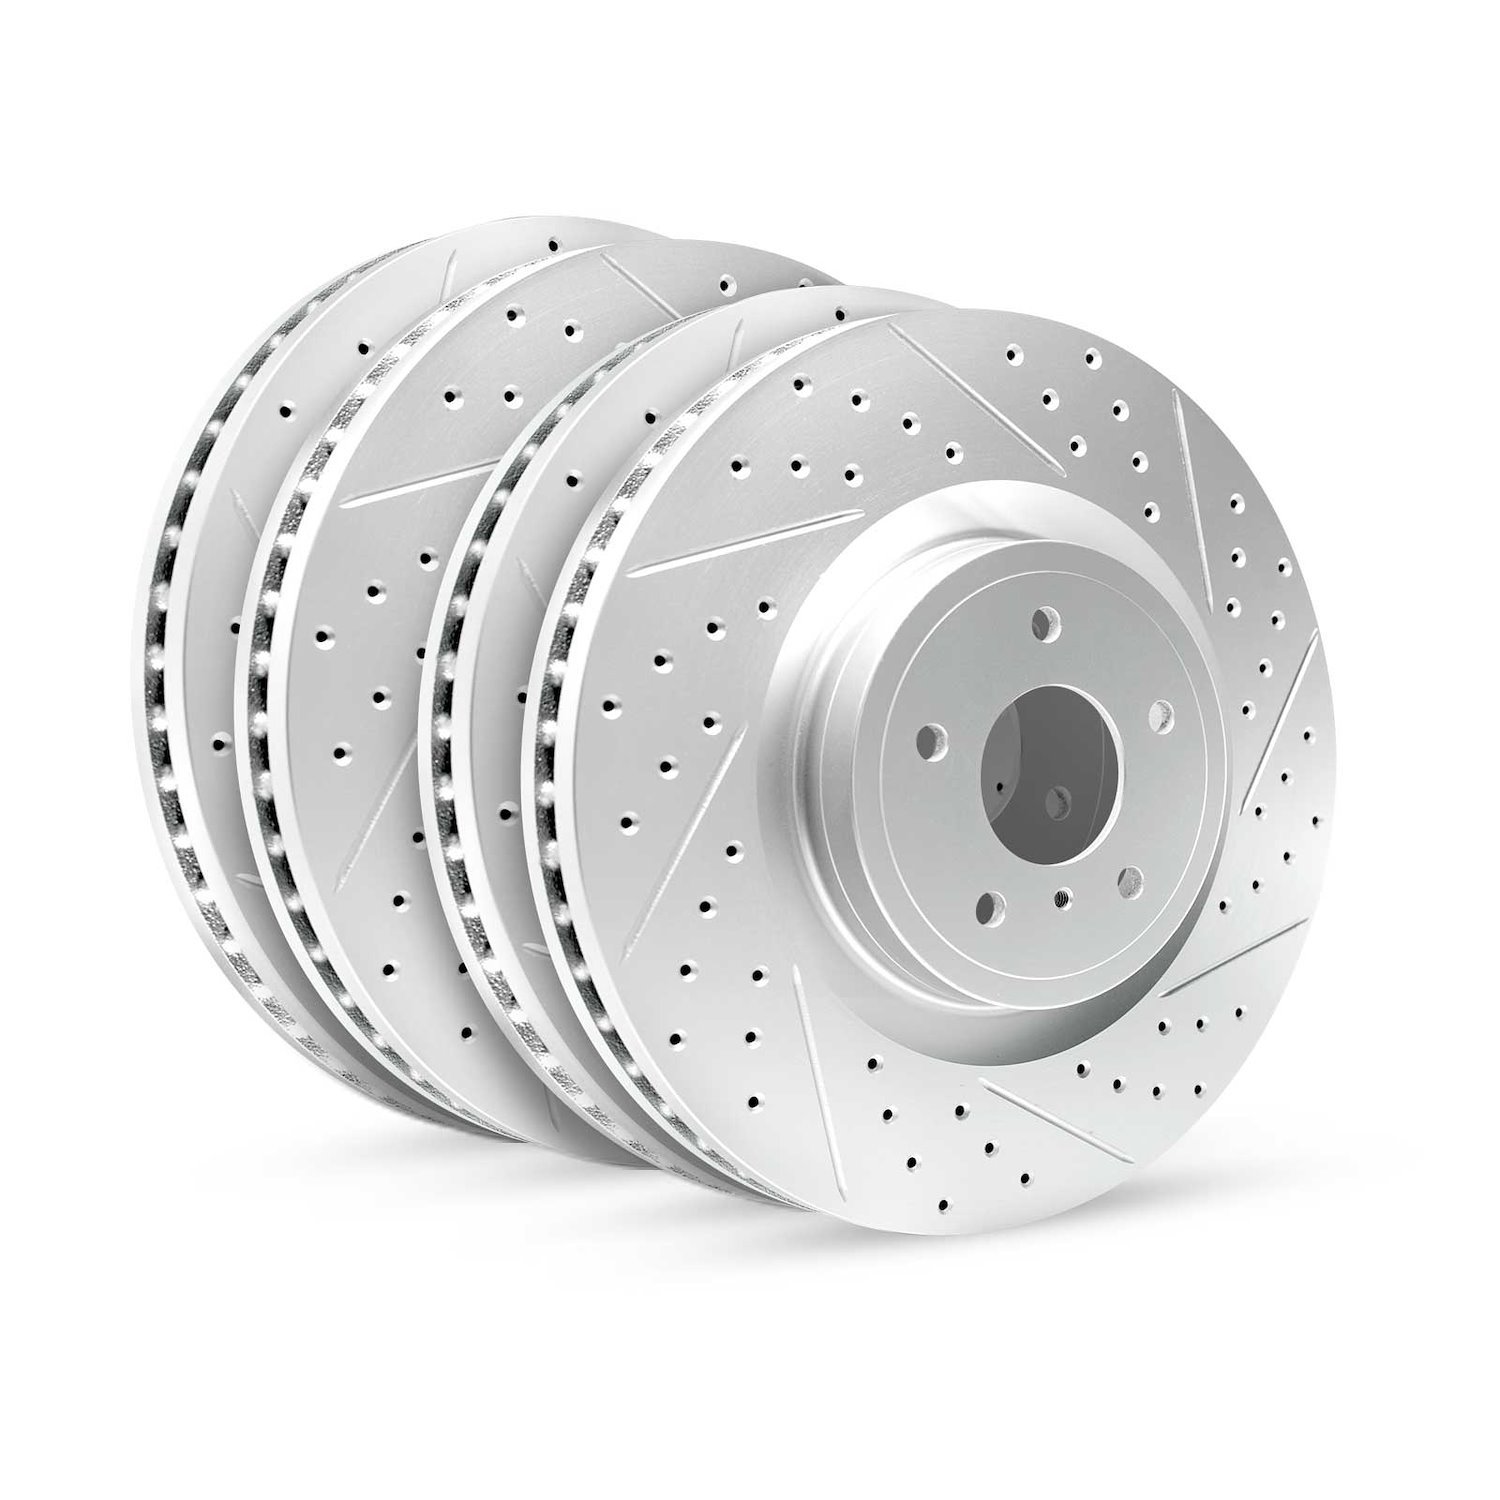 GEO-Carbon Drilled/Slotted Rotors, 1991-1996 Acura/Honda,